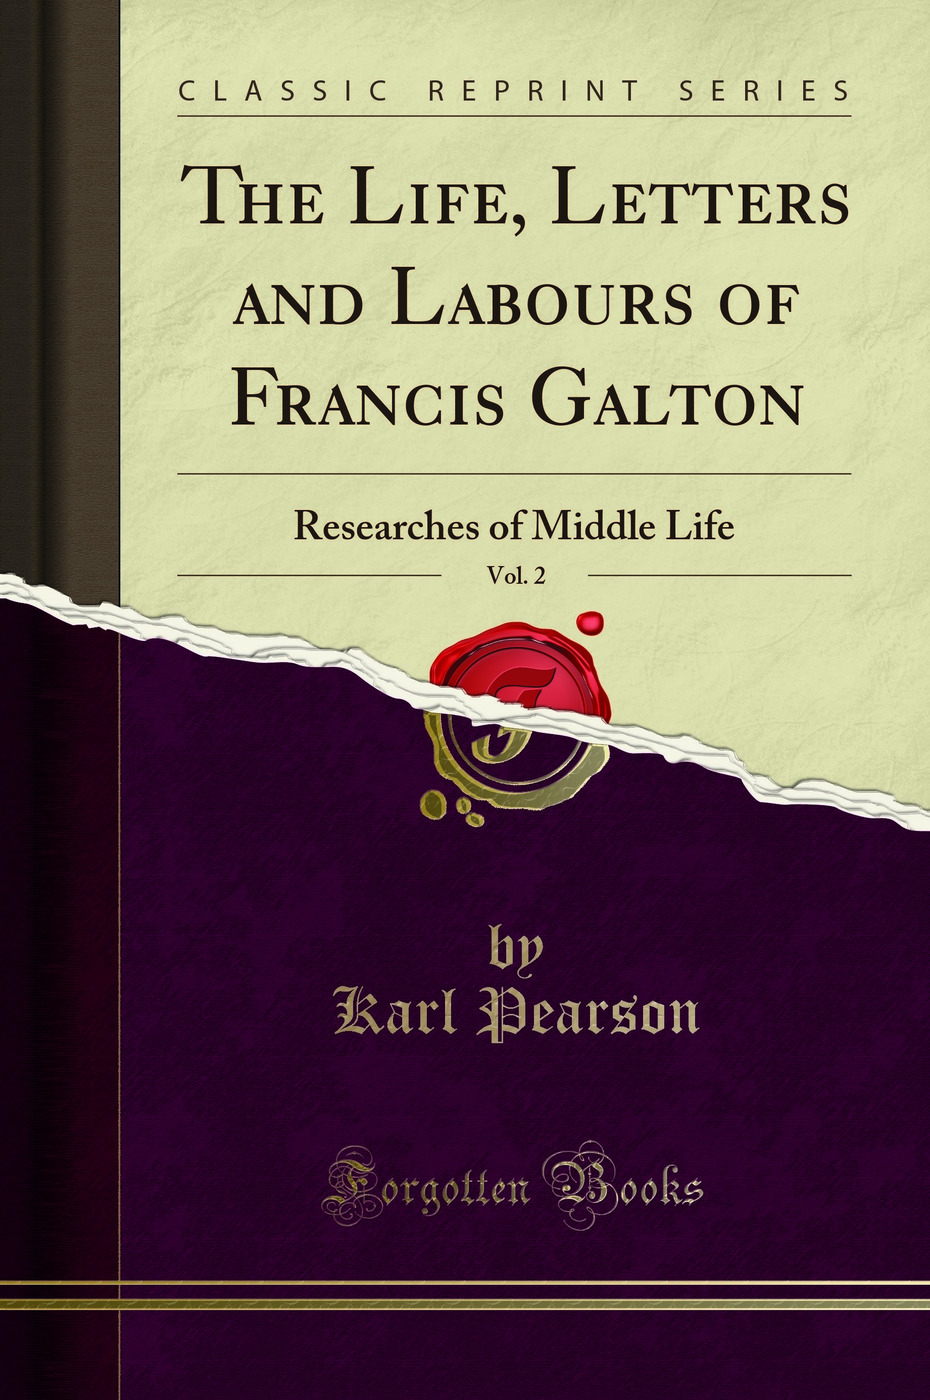 The Life, Letters and Labours of Francis Galton, Vol. 2 (Classic Reprint) - Karl Pearson